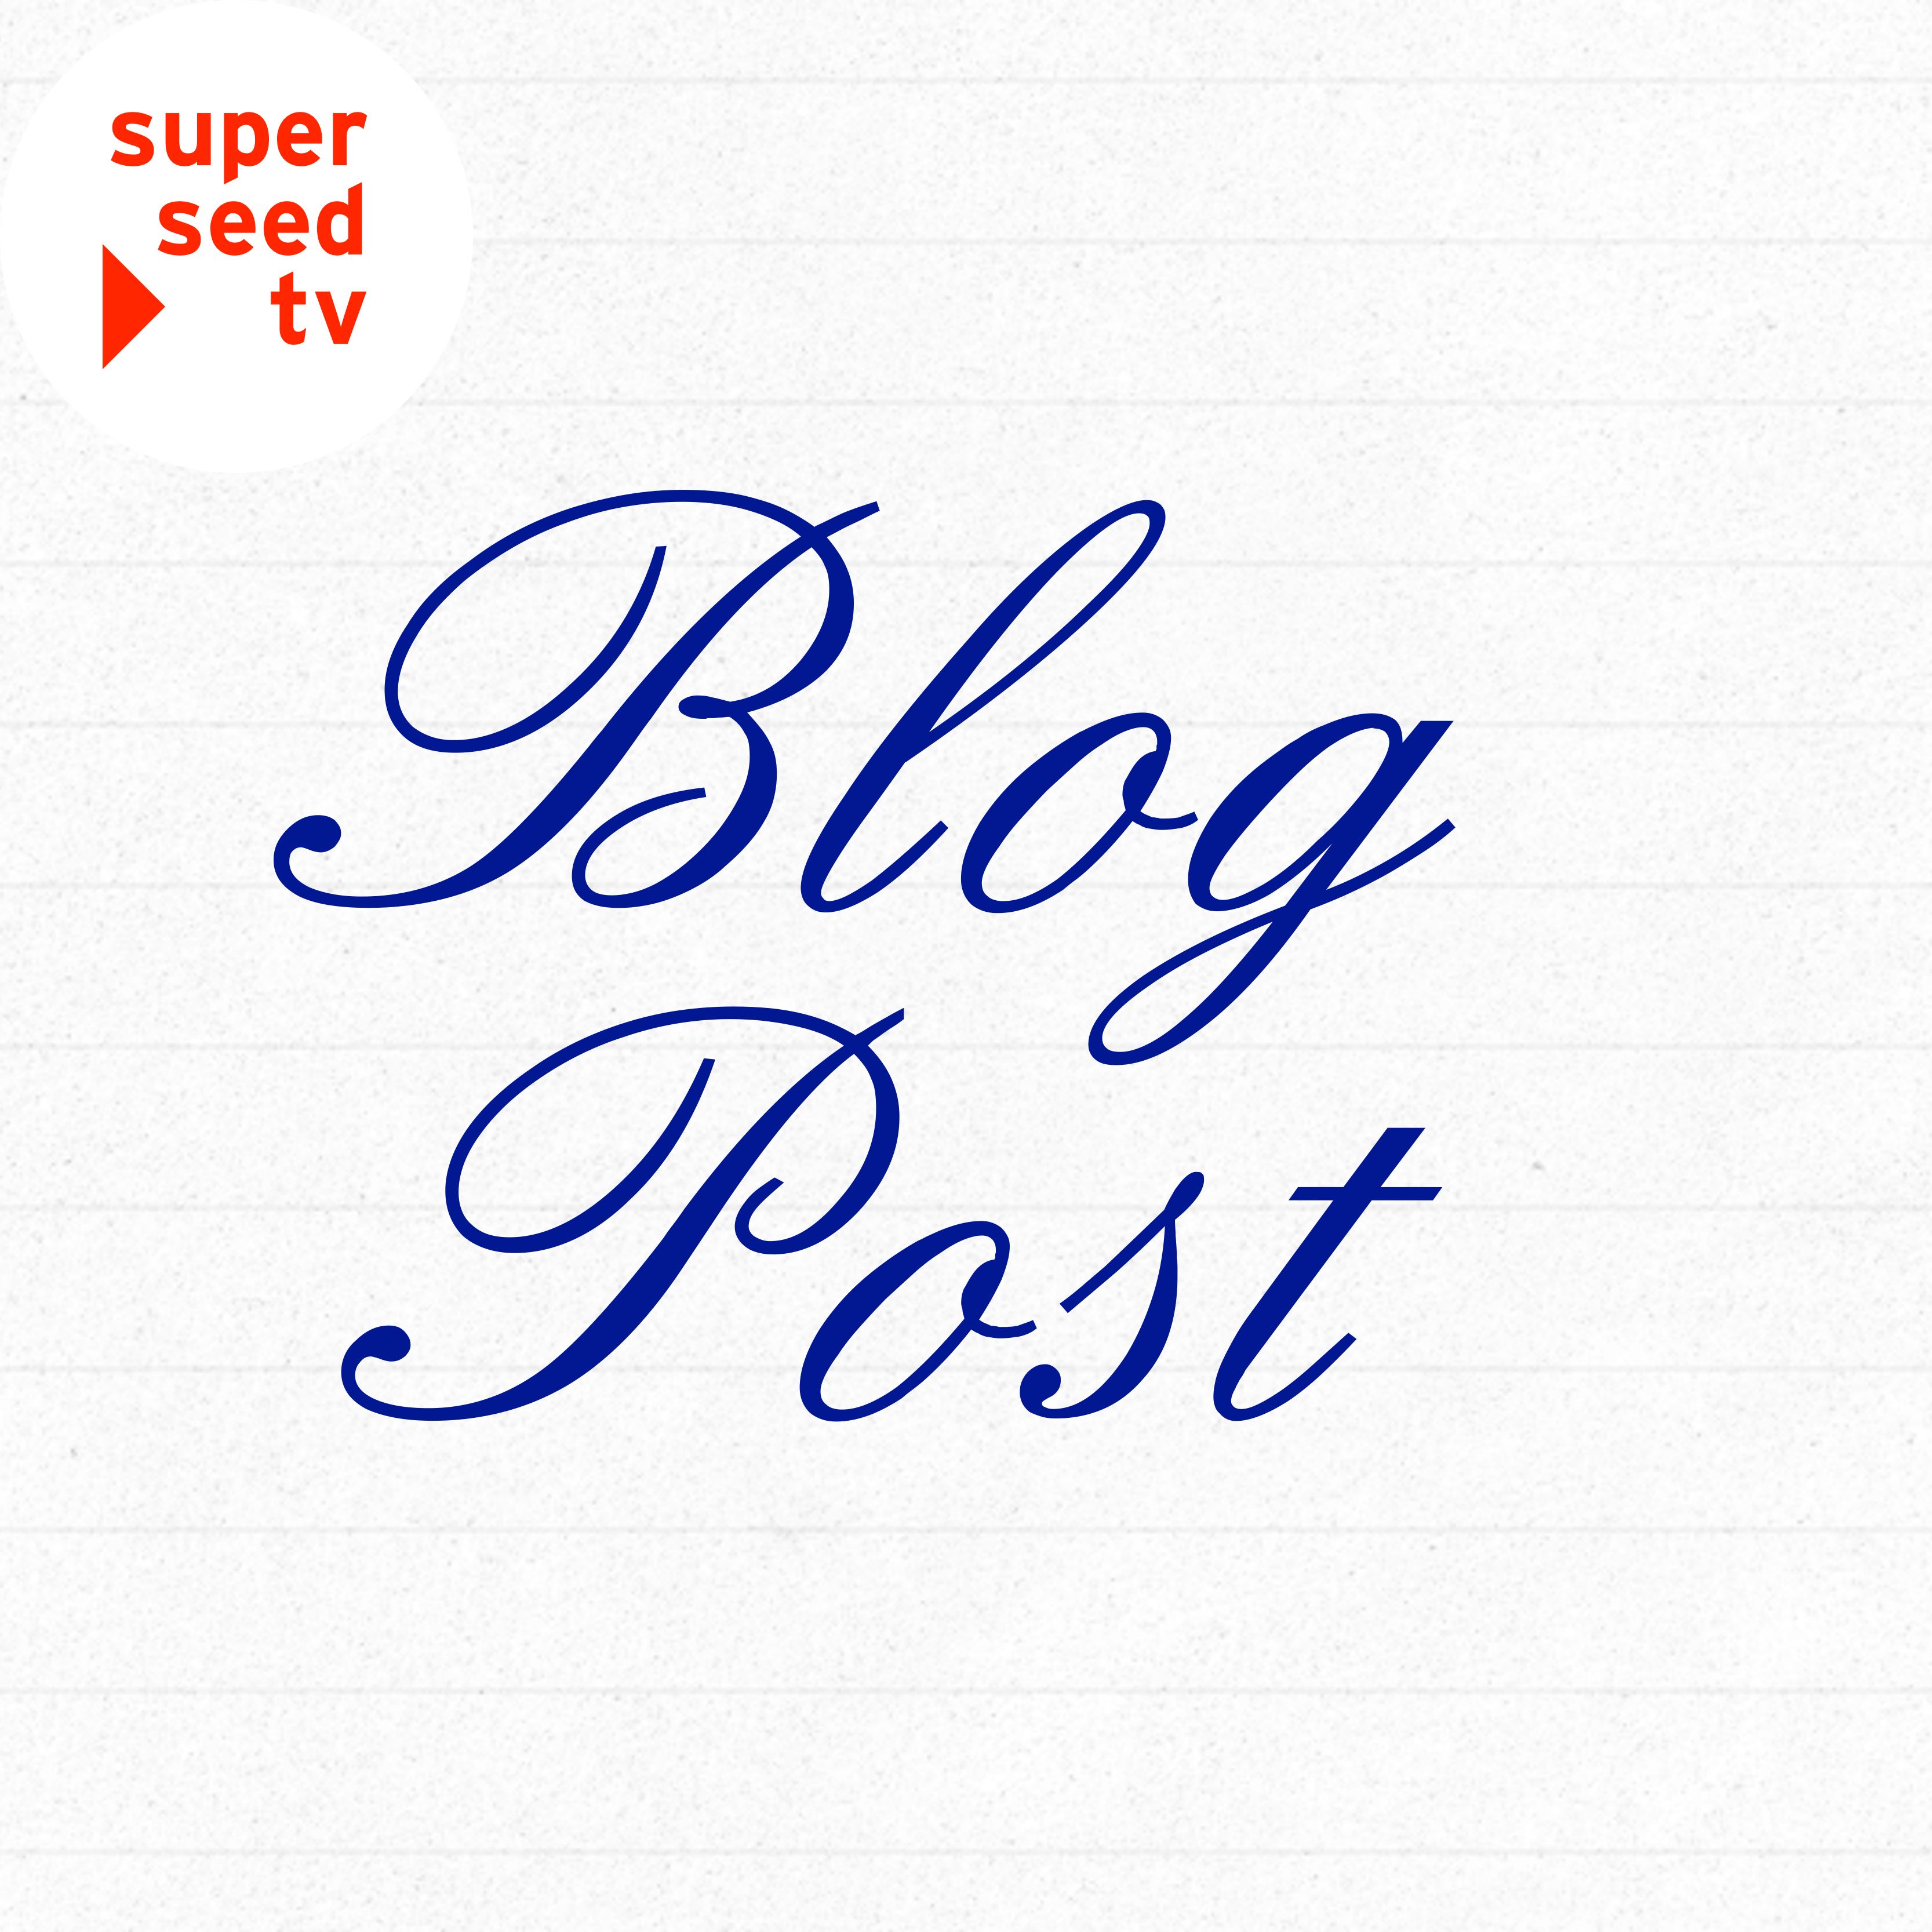 superseed TV Blog Post